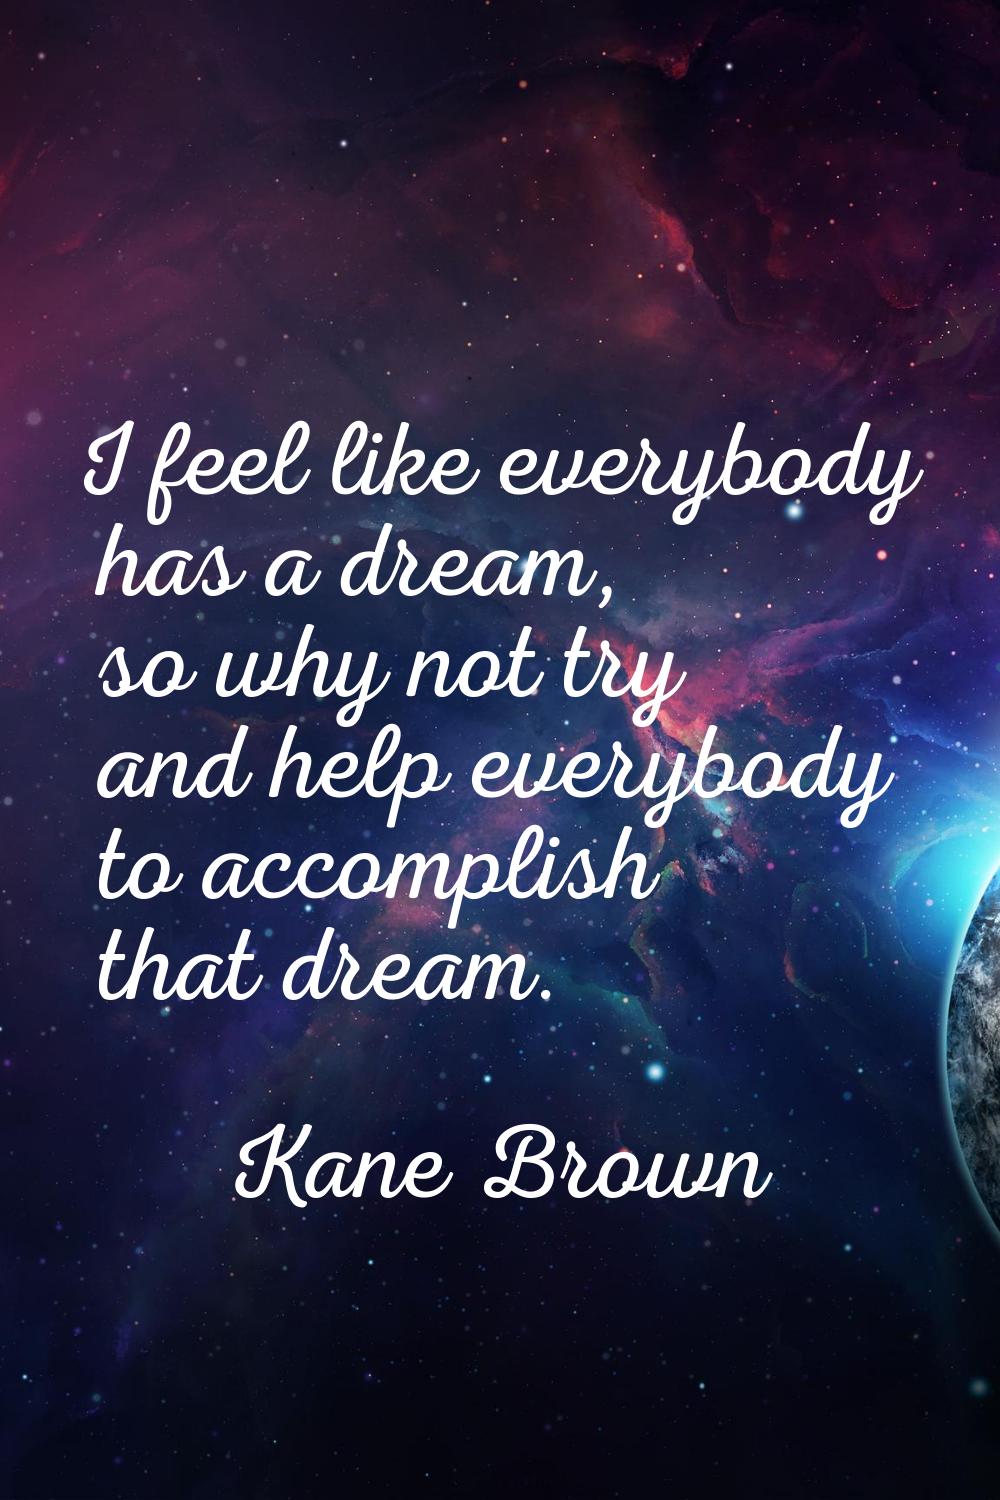 I feel like everybody has a dream, so why not try and help everybody to accomplish that dream.